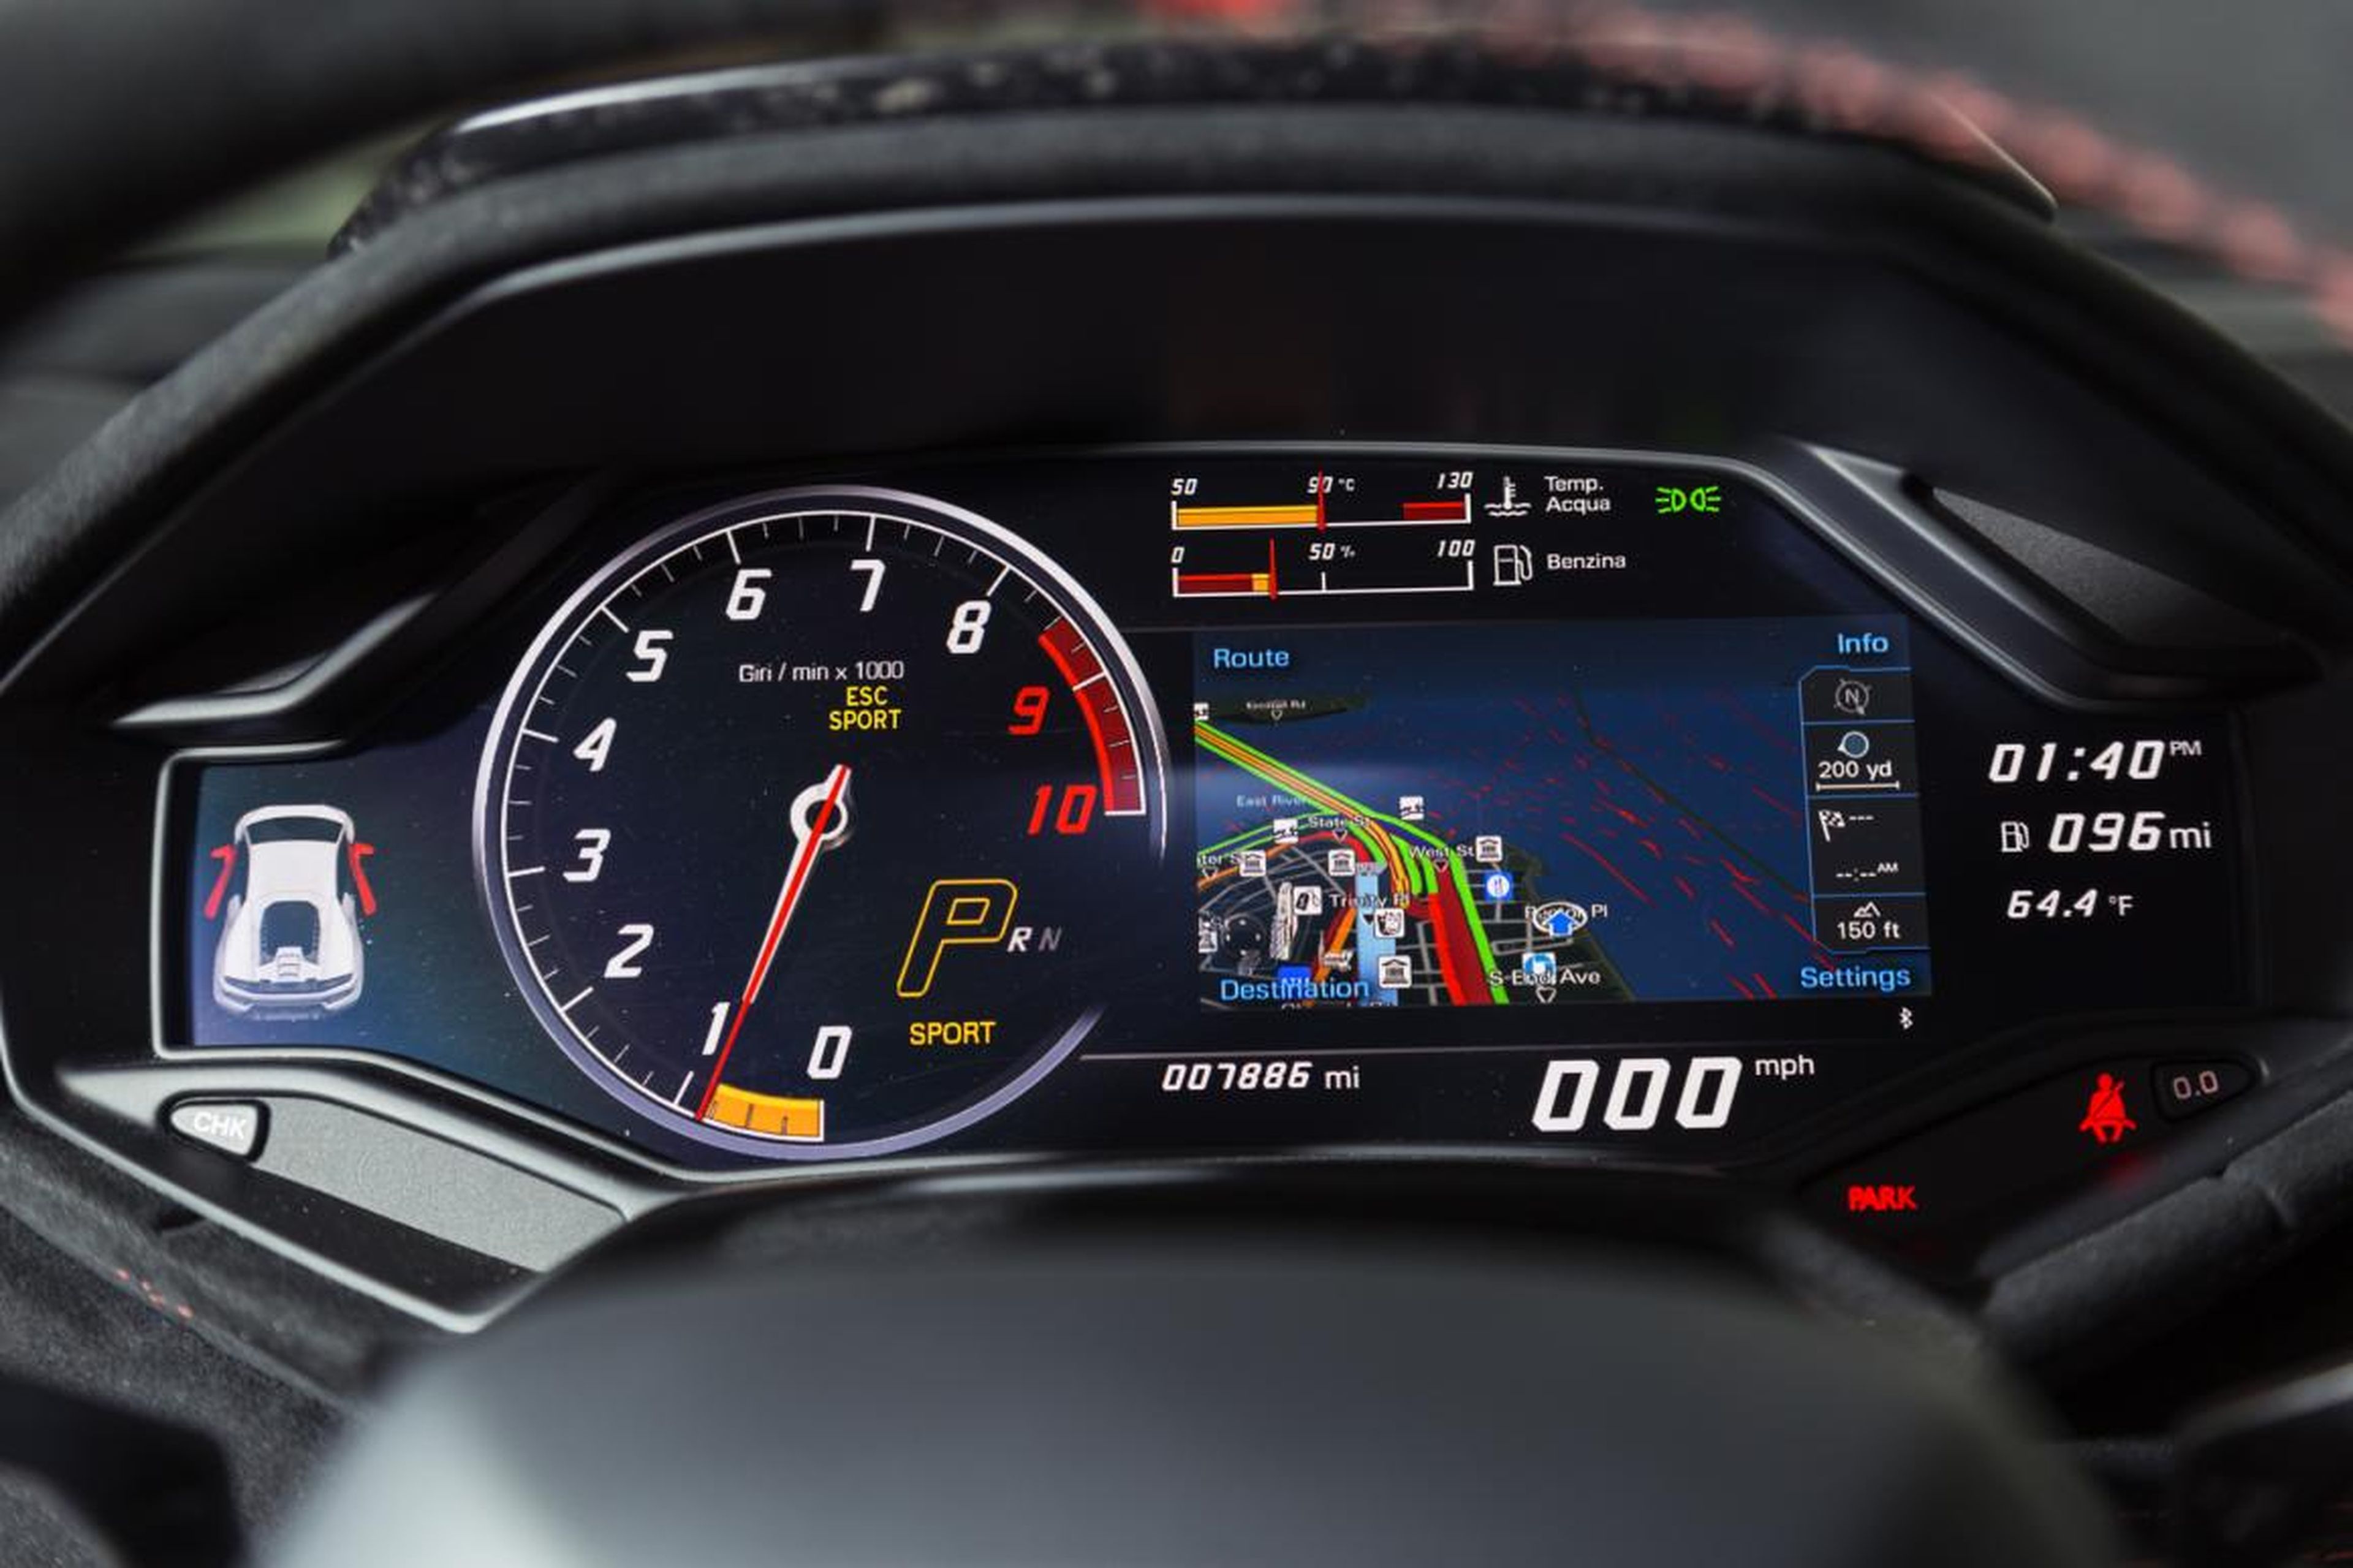 The navigation renderings might be small, but they're detailed and accurate. The system provides Bluetooth connectivity, as well as USB/AUX ports. You don't really miss a big touchscreen interface.